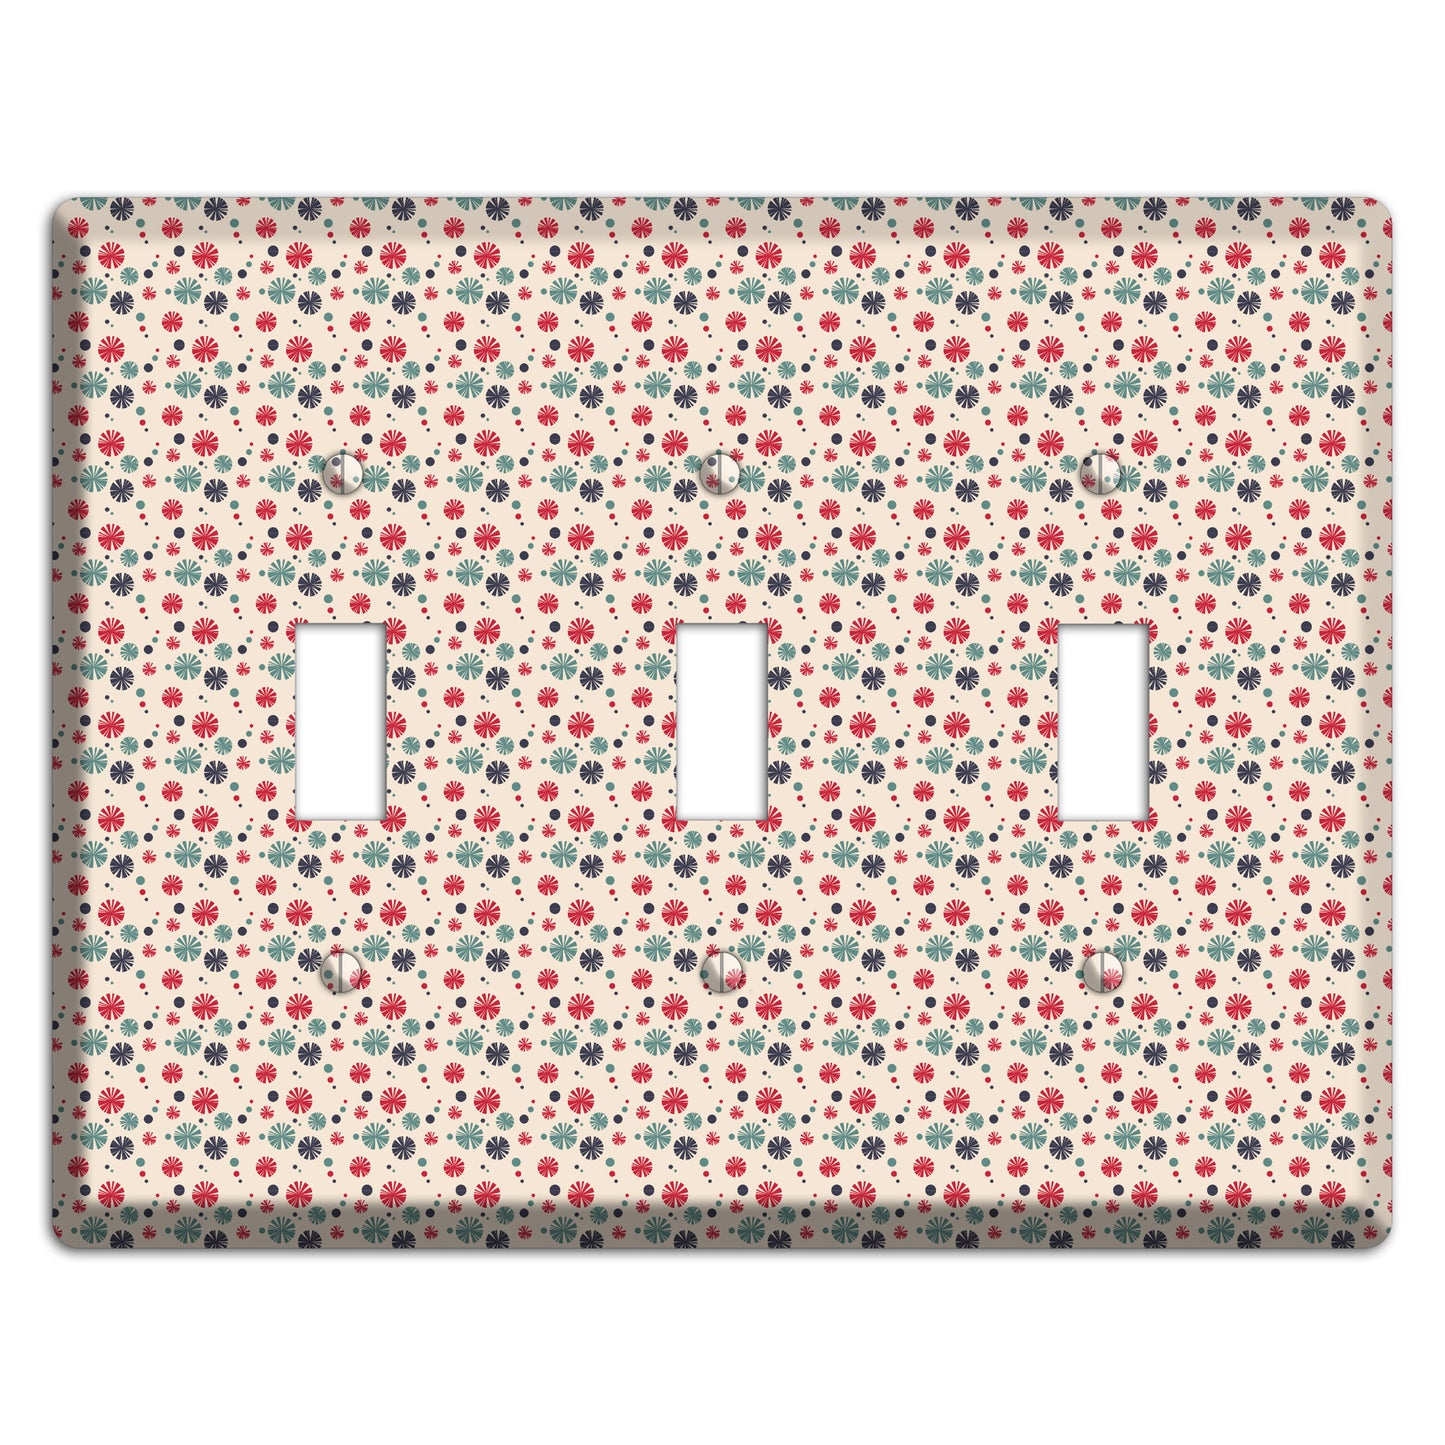 Off White with Red Green Blue Retro Bursts 3 Toggle Wallplate